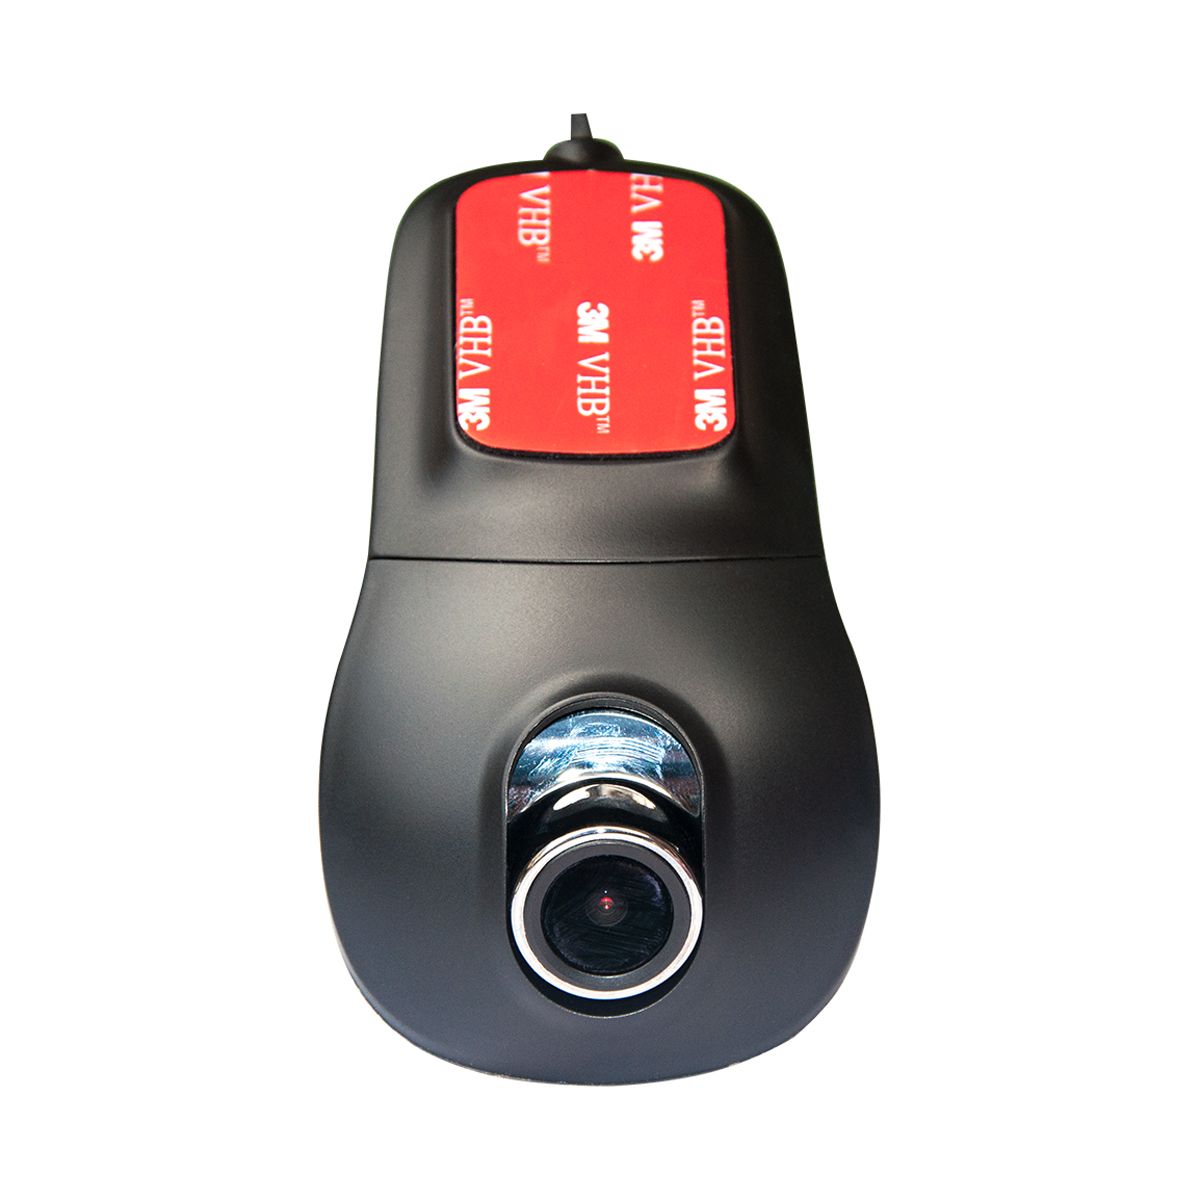 FHD 1080P 170 degree ultra wide angle universal hidden wifi car camera Featured Image